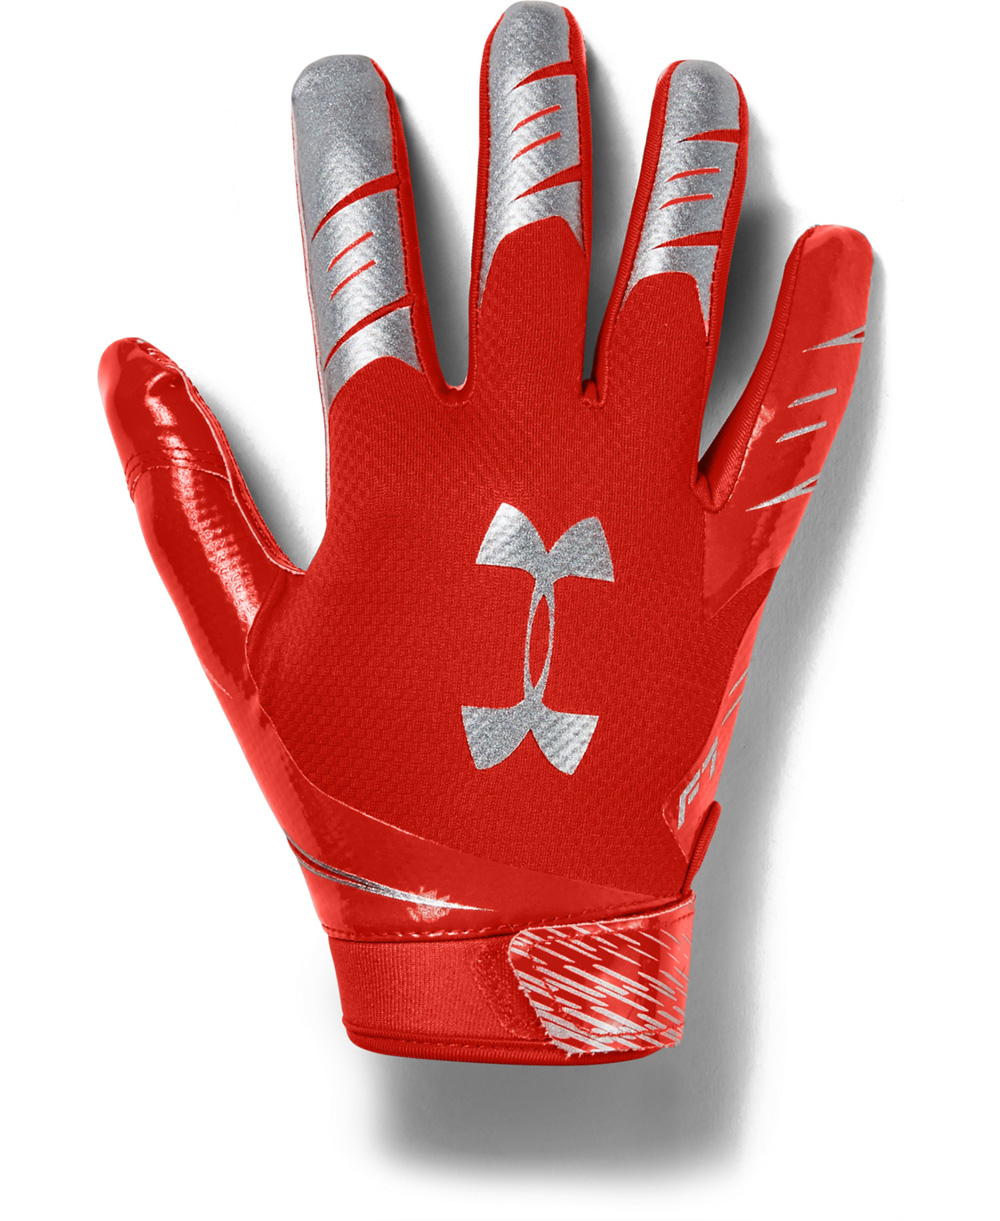 Under Armour F8 Adult Mens Football Gloves w/Gluegrip Sticky, NFHS/NCAA  Approved